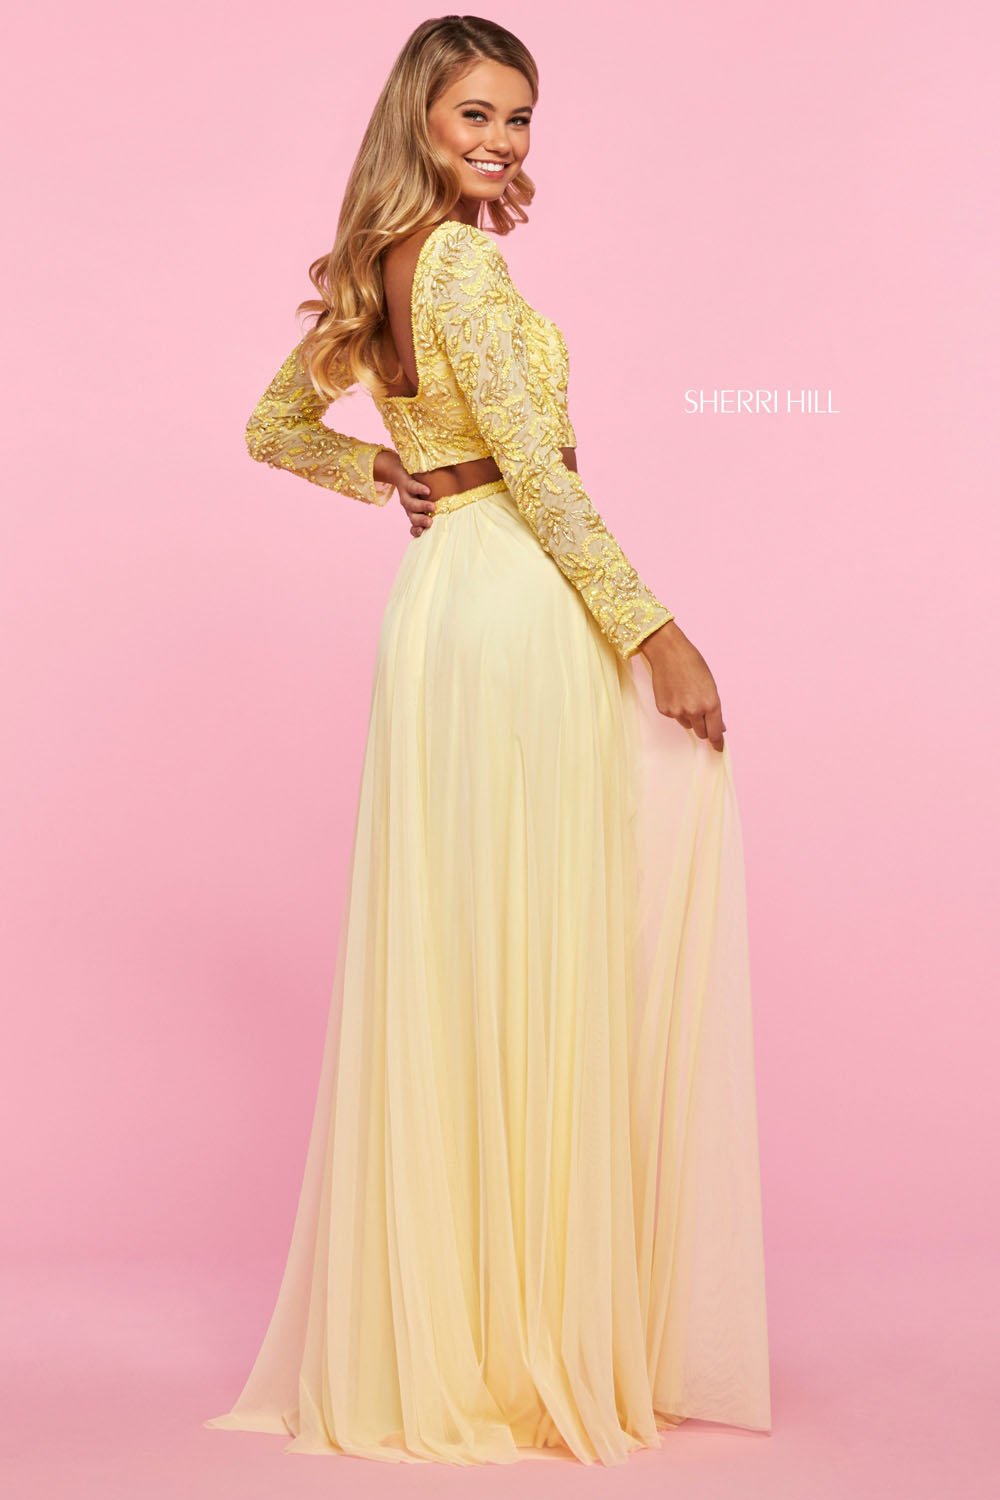 Sherri Hill 53559 dress images in these colors: Nude Ivory, Light Blue, Yellow, Blush.